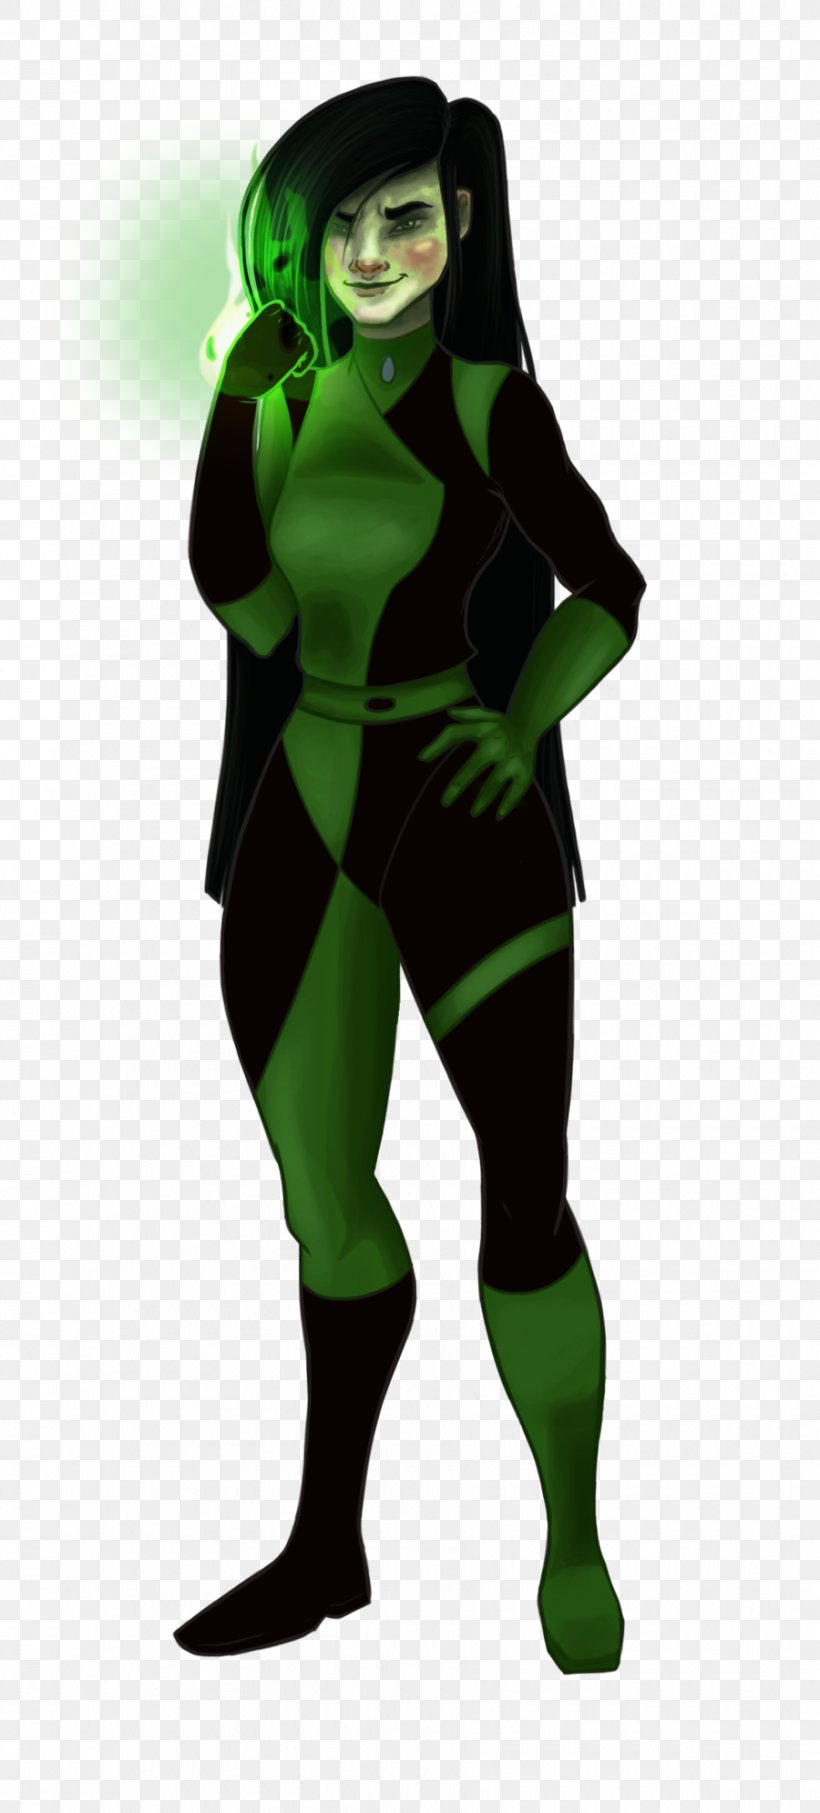 Superhero Green Spandex Costume Animated Cartoon, PNG, 900x1990px, Superhero, Animated Cartoon, Costume, Fictional Character, Green Download Free